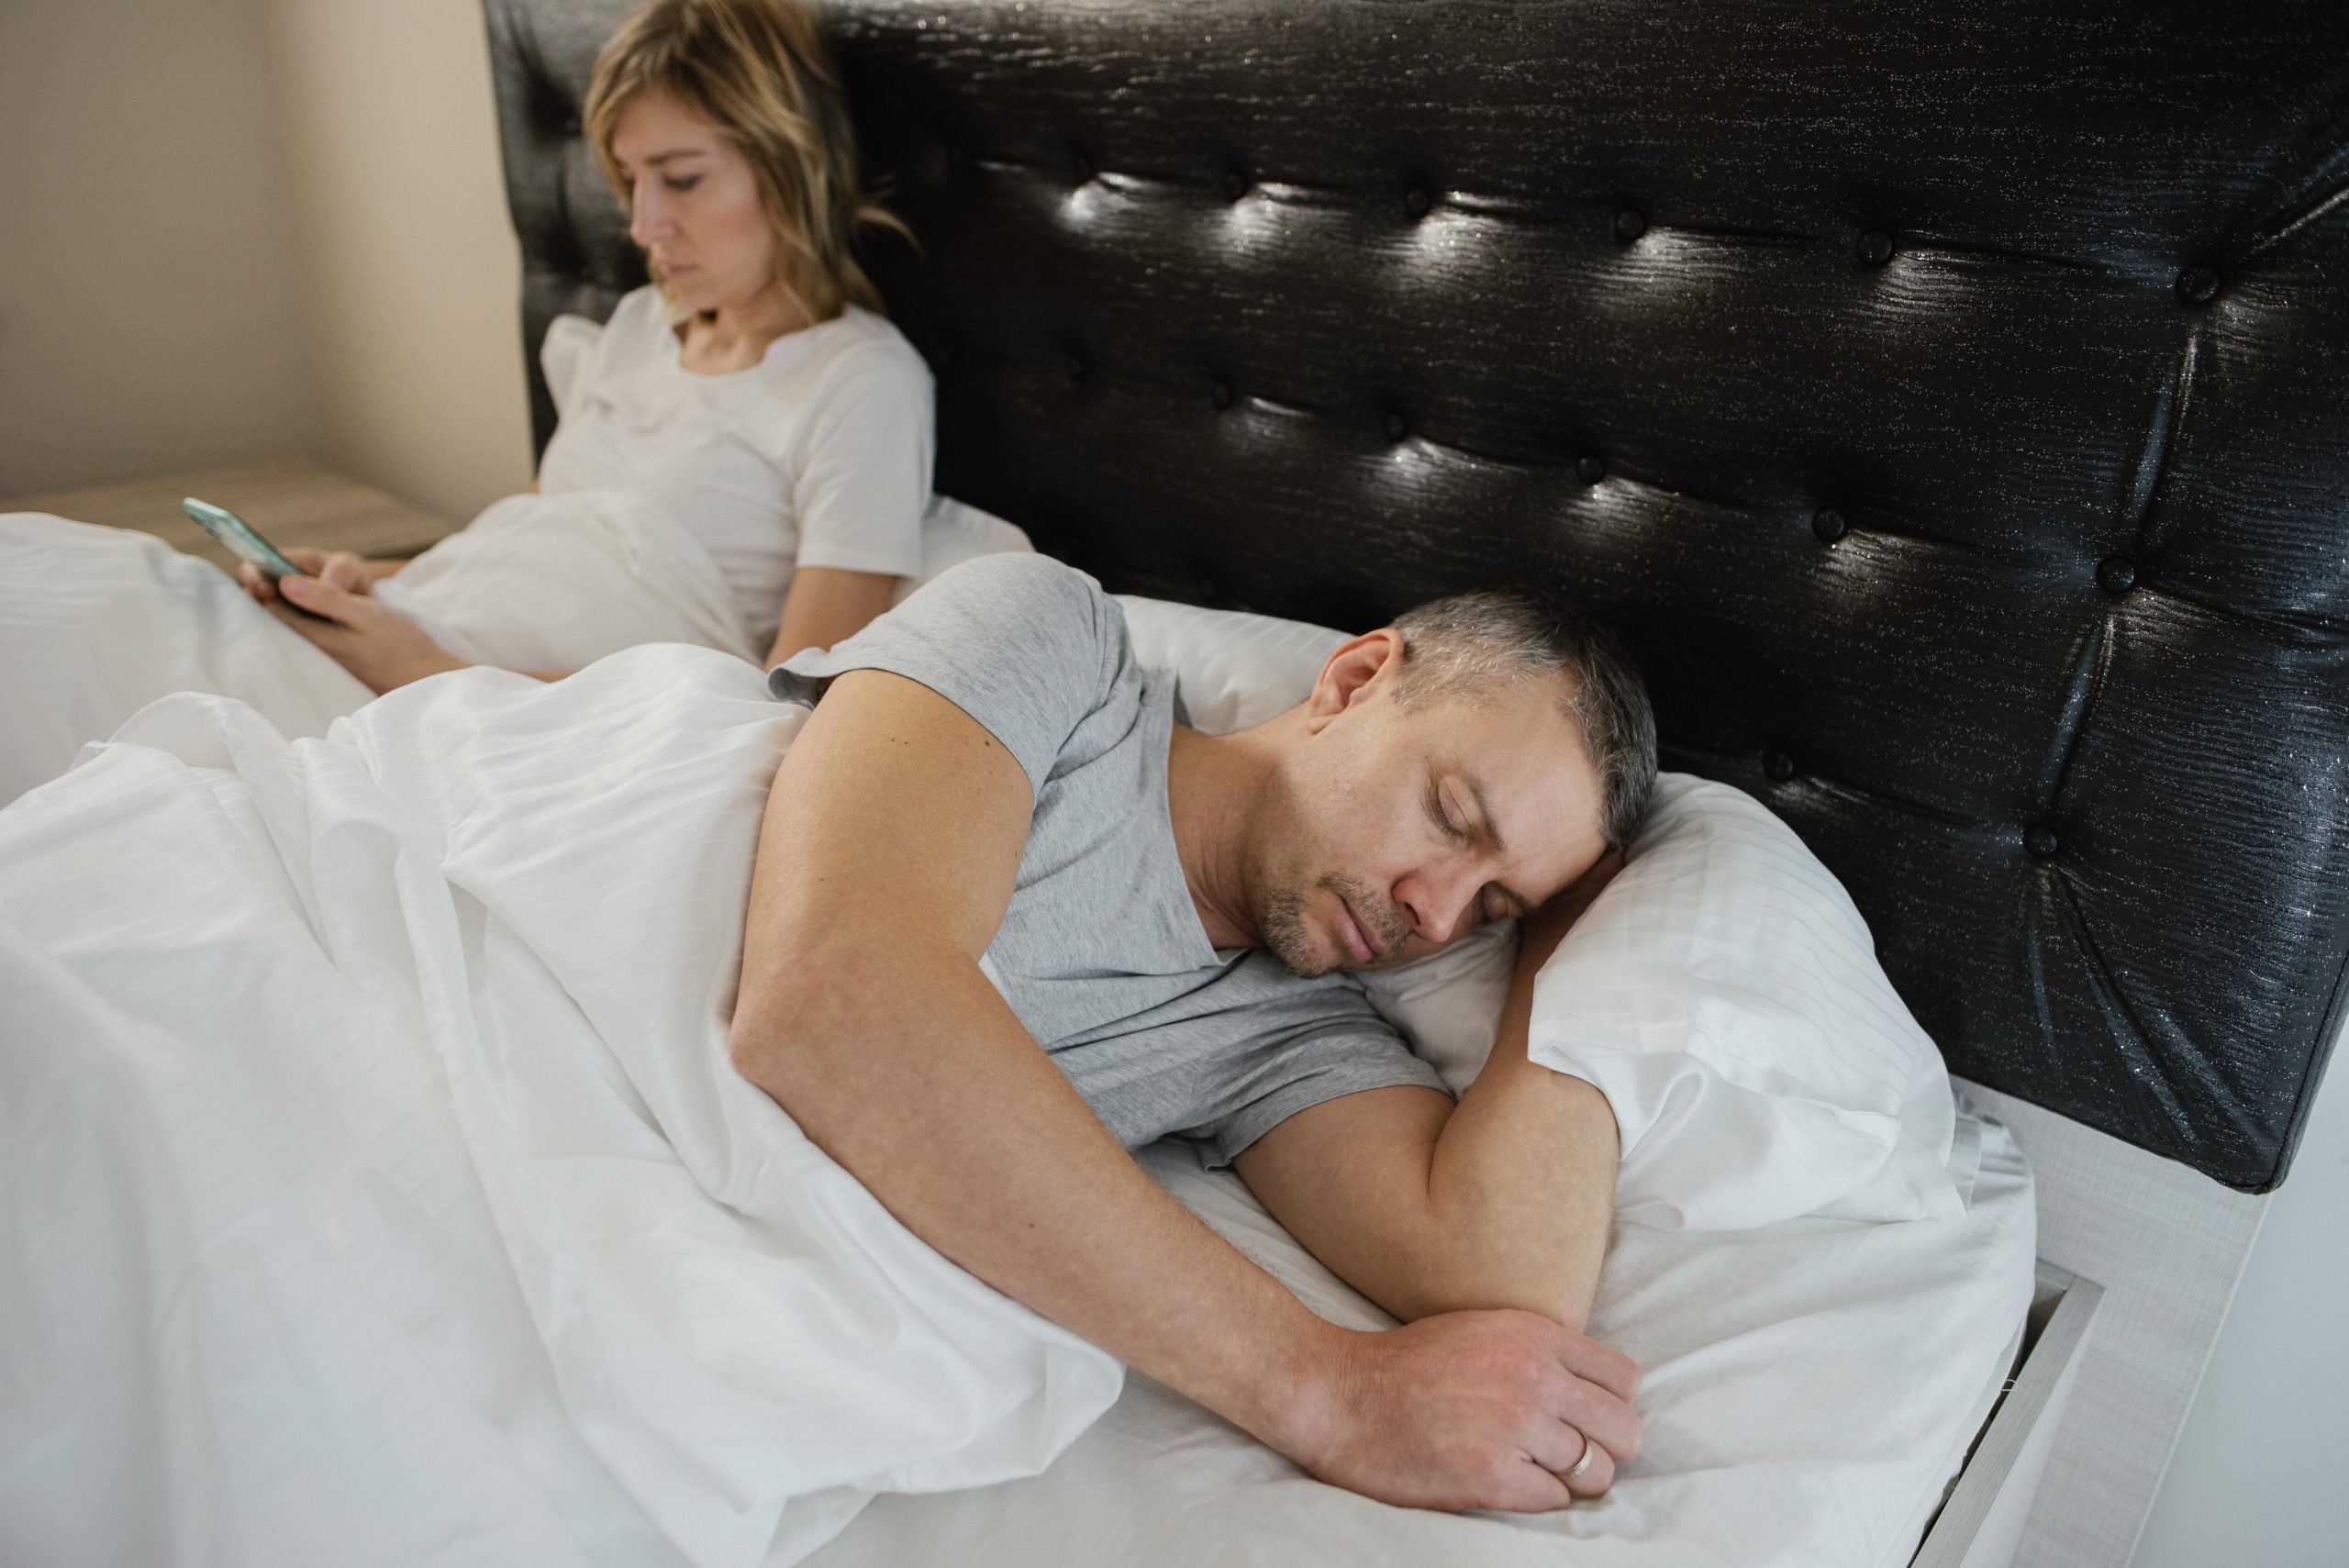 Purchase Zero-G's Adjustable Bed Today Your Solution to Stop Snoring